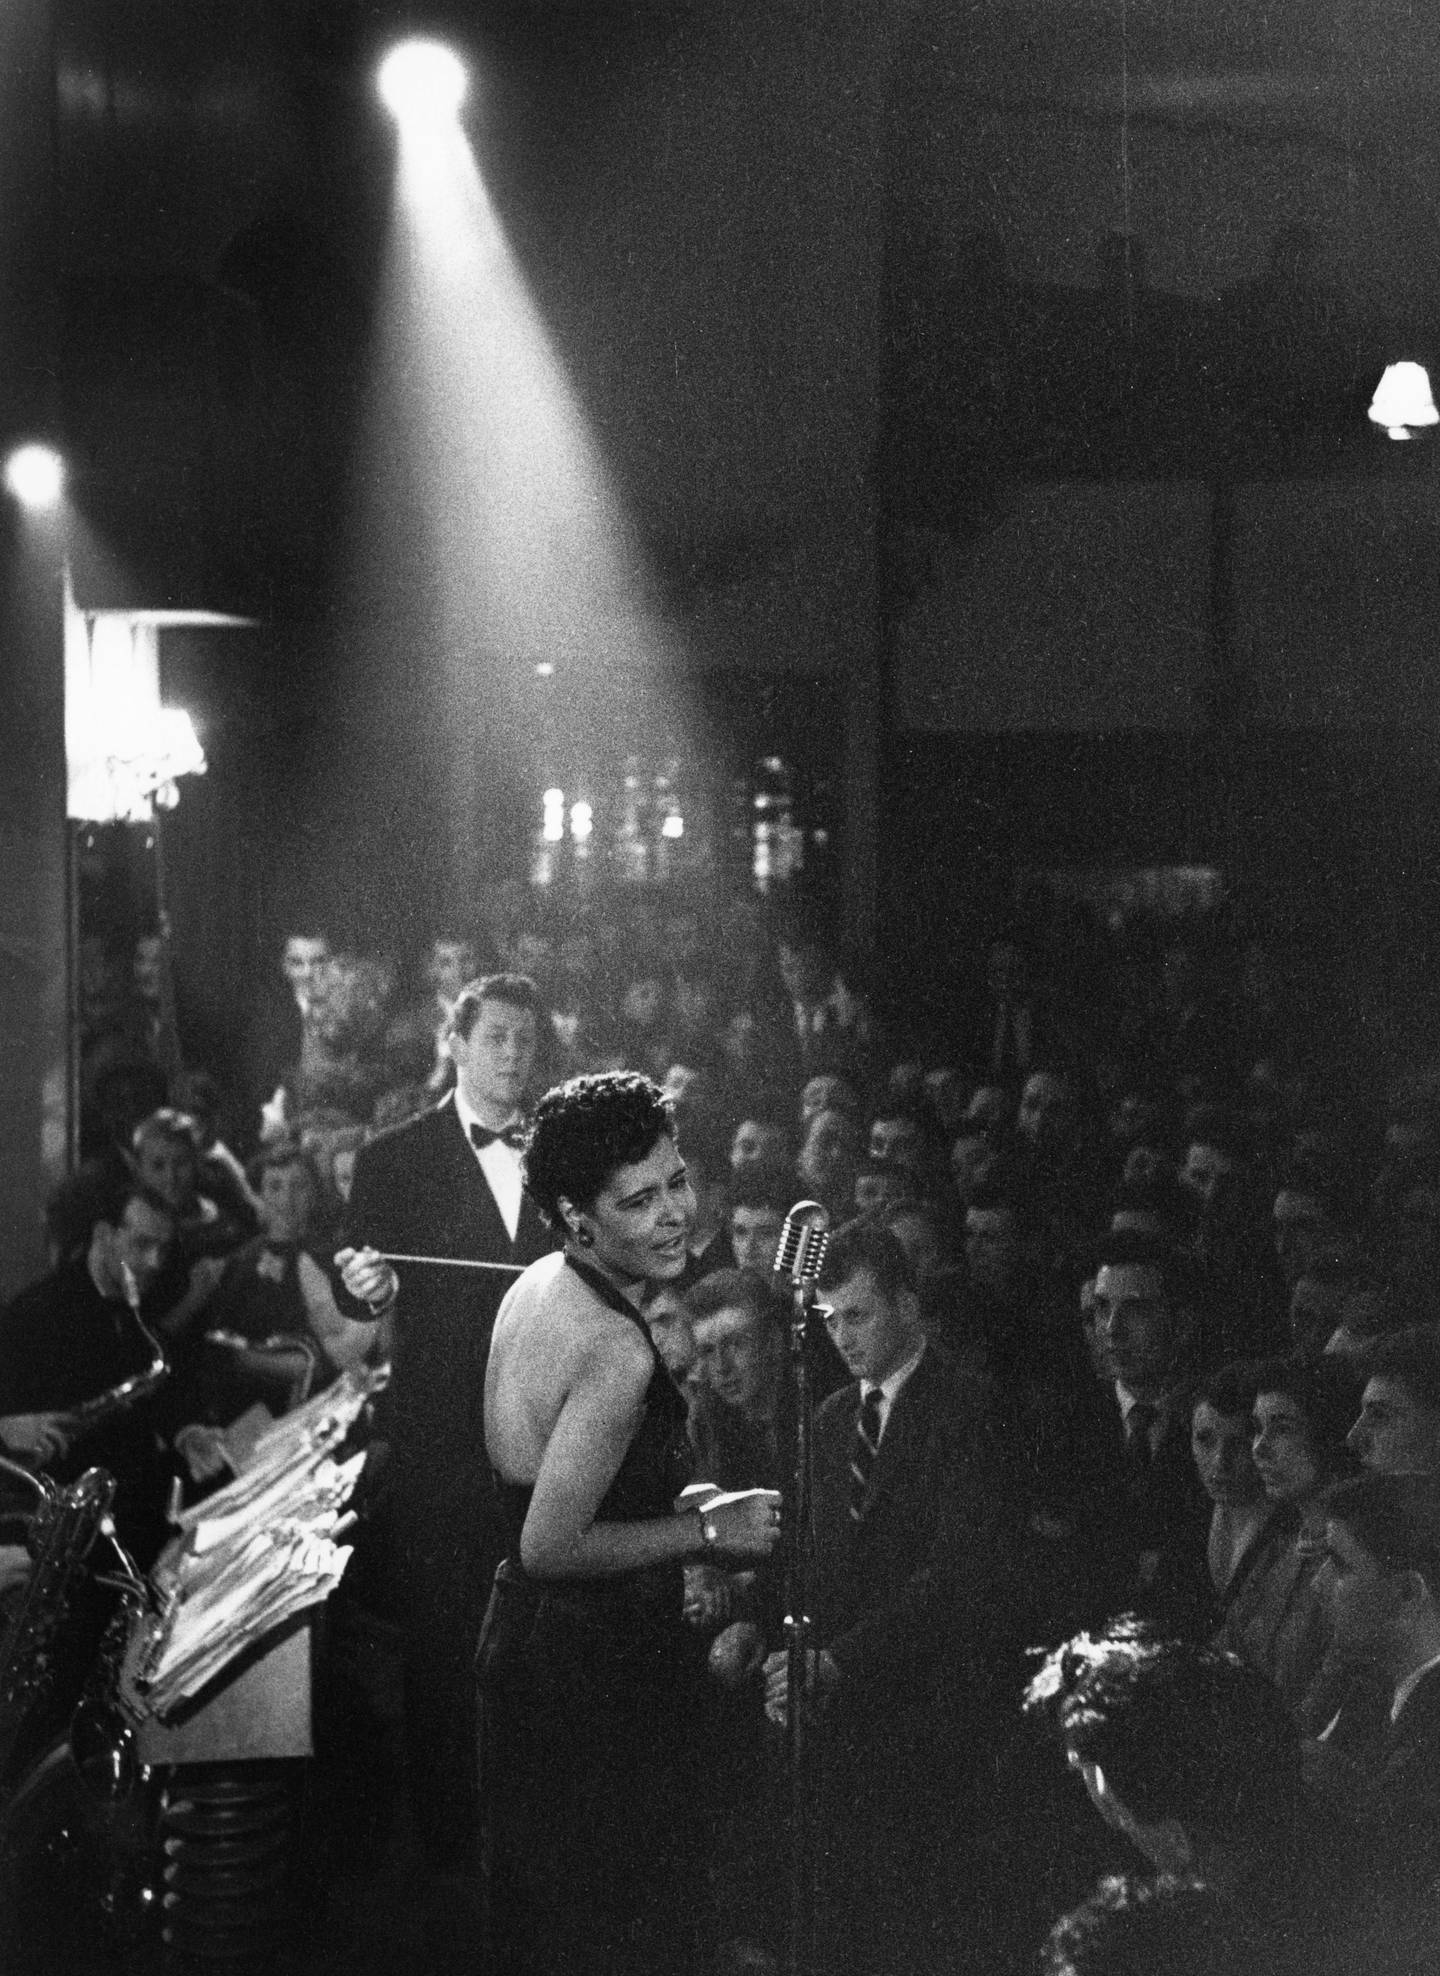 American jazz singer Billie Holiday (1915 - 1959) in the spotlight during a performance.  Original Publication: Picture Post - 7380 - Billie Holiday -  (Photo by Charles Hewitt/Getty Images)